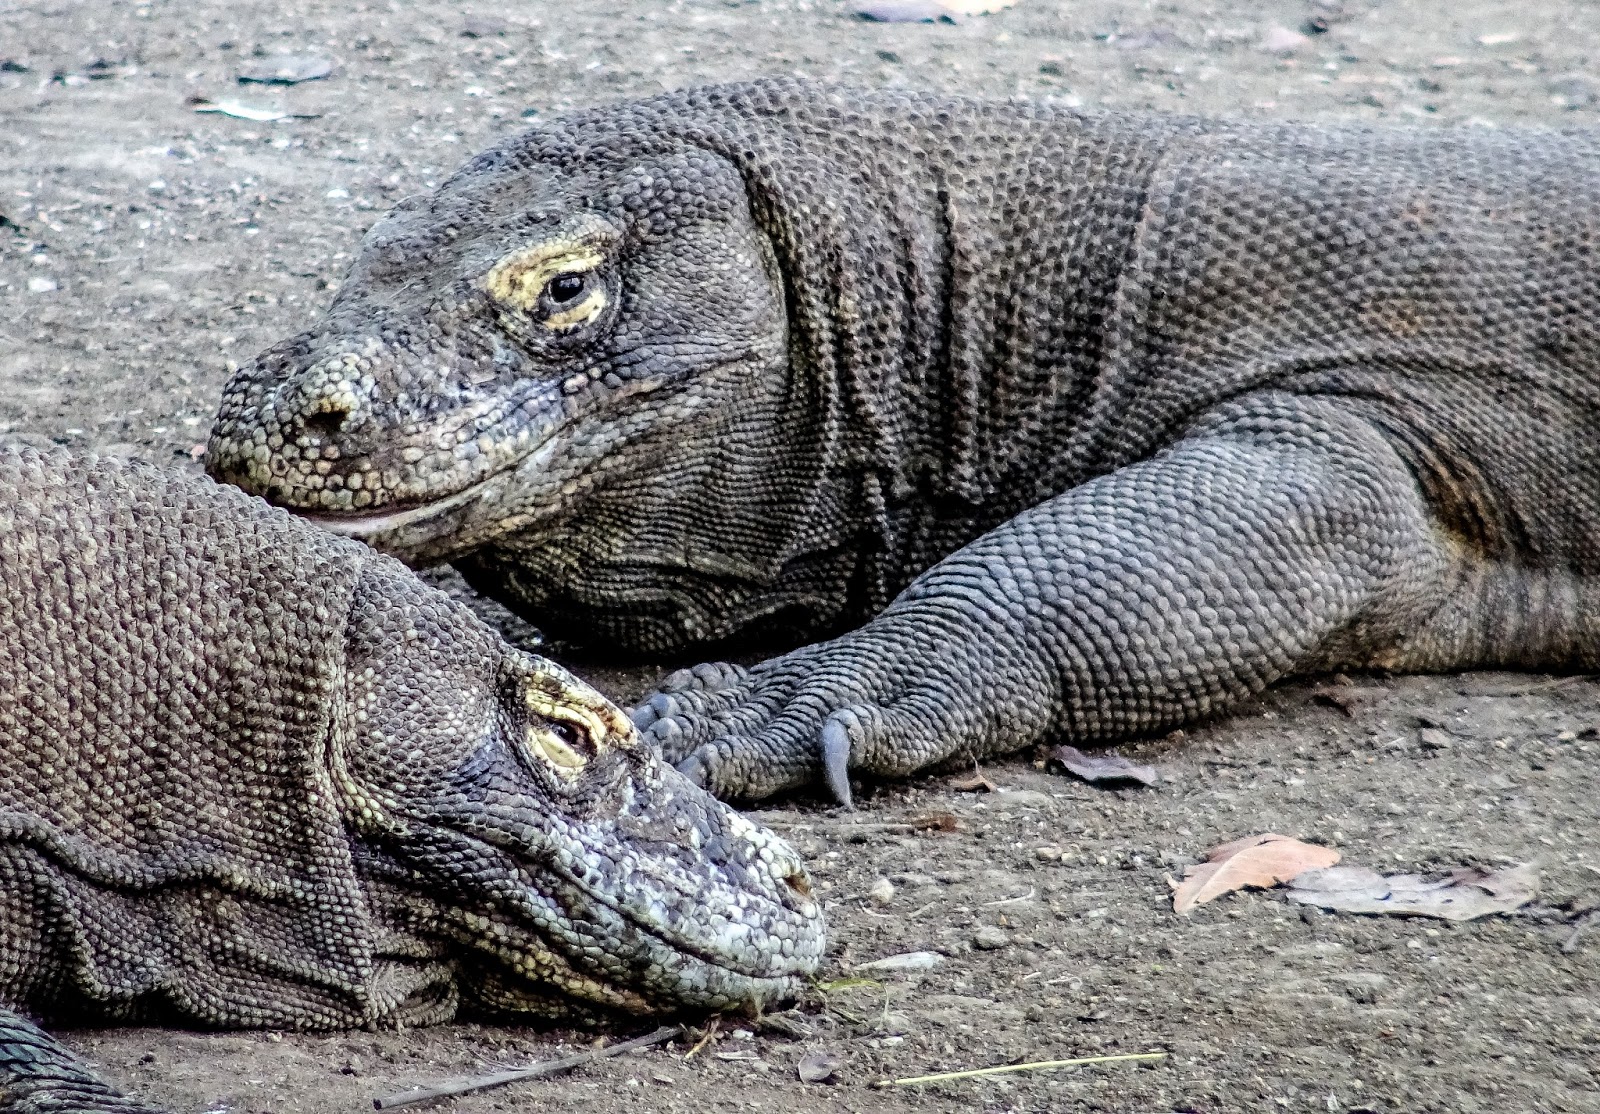 Zoology Jottings: Komodo Dragons. A peaceful morning in the Komodo National  Park and an acrimonious debate on reptilian venoms